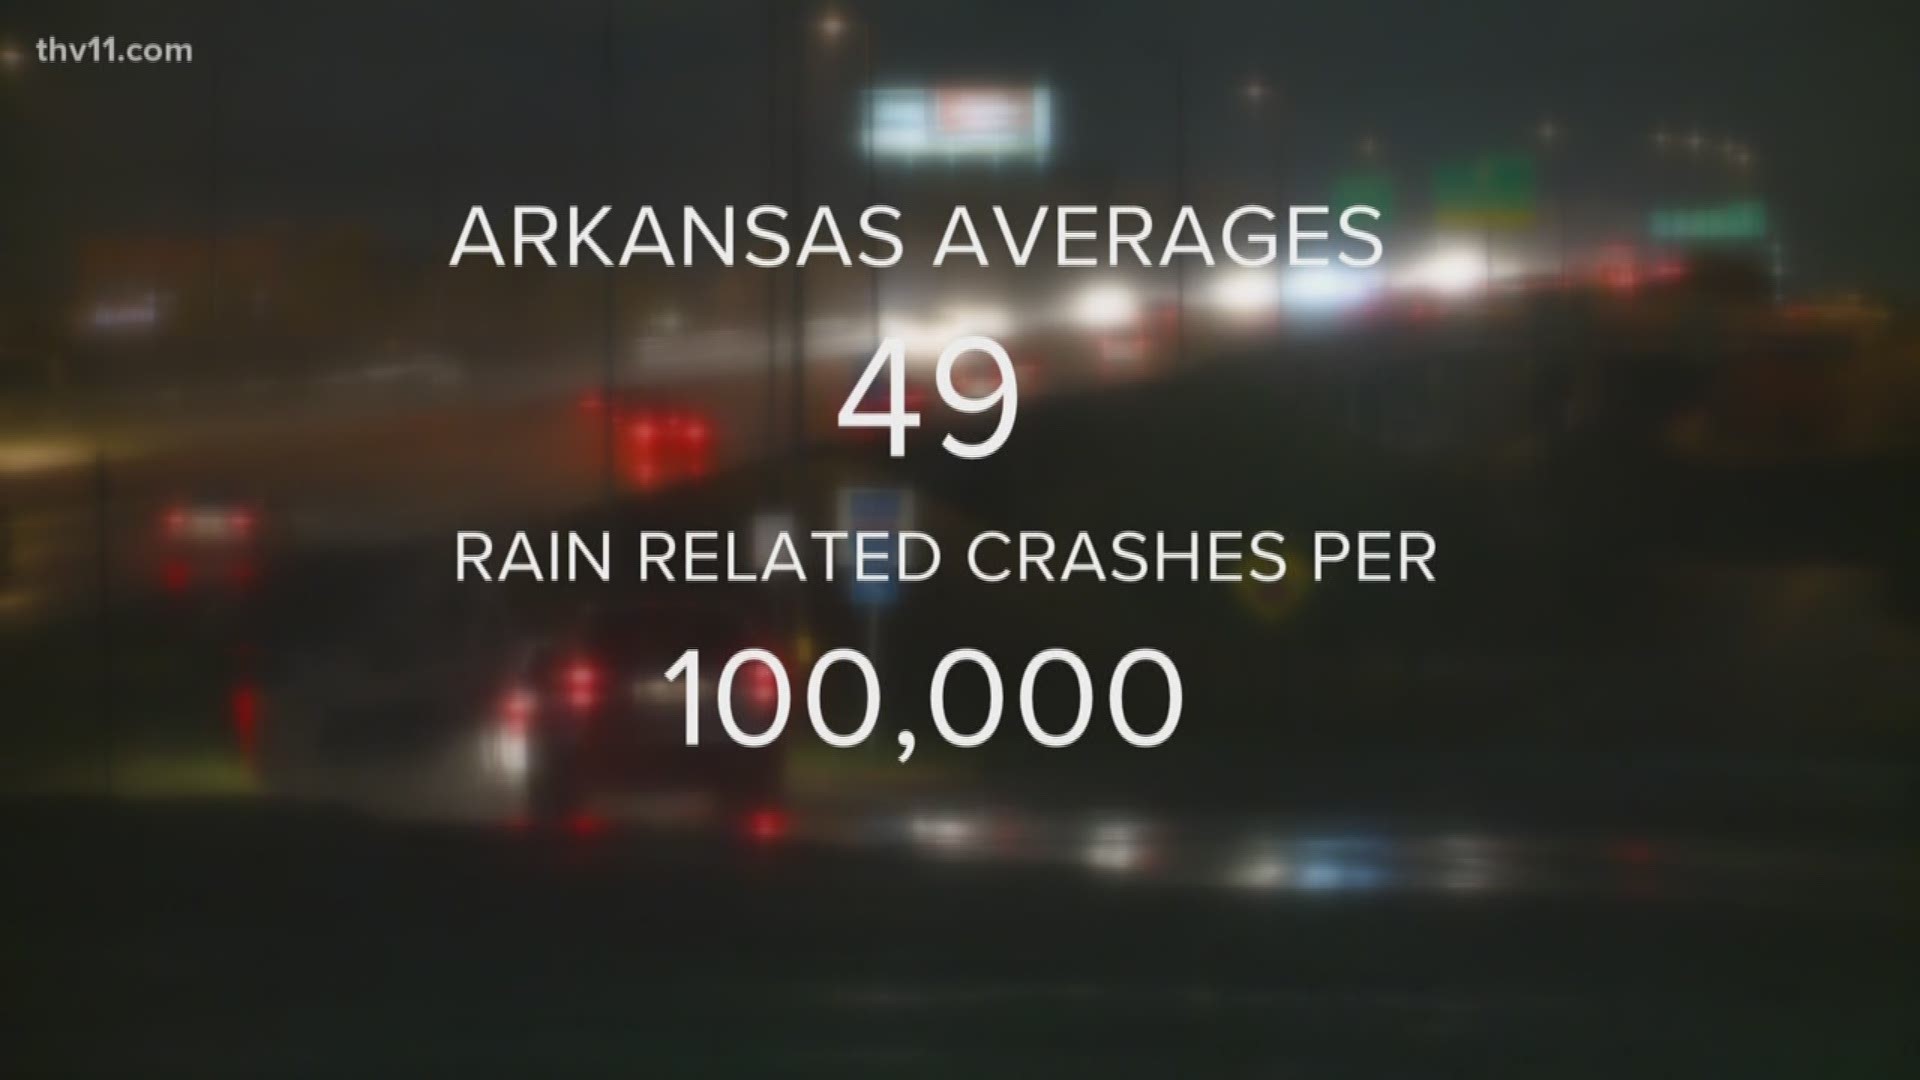 THV11'S MELISSA ZYGOWICZ IS LIVE IN WEATHER FORCE 11 TO TELL US WHY WE RANK SO HIGH ON THAT LIST!